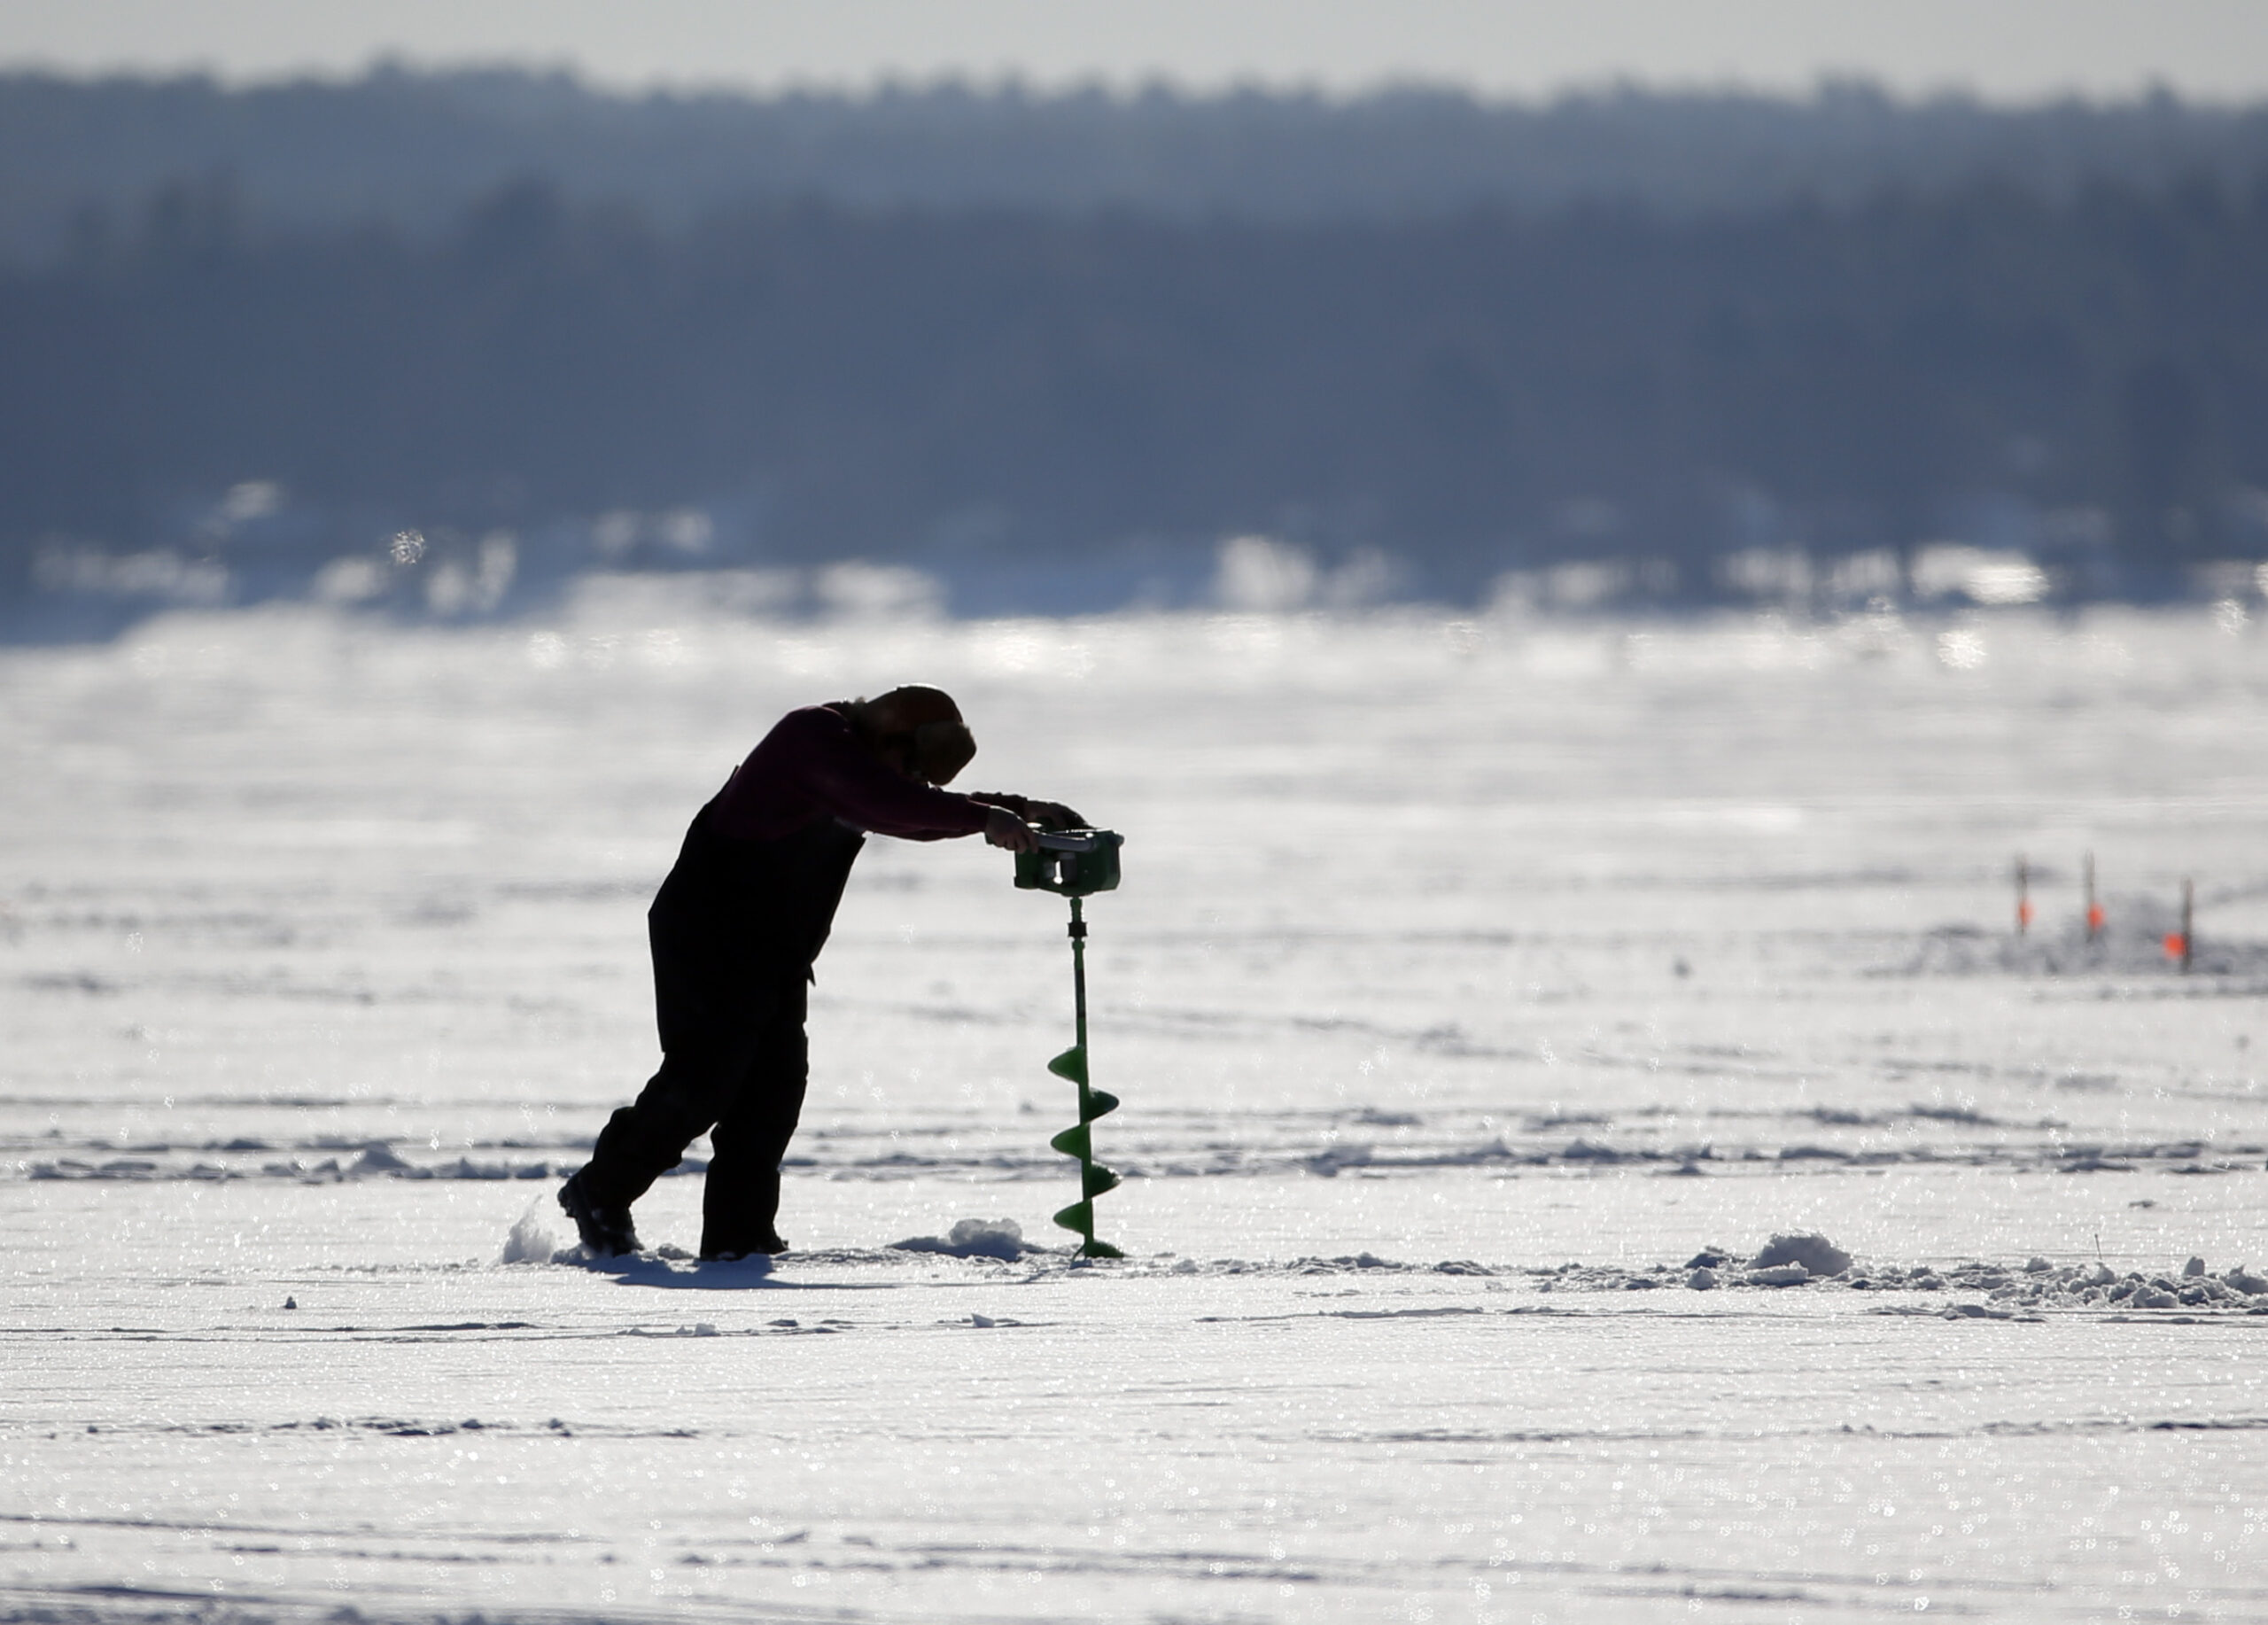 Study Links Loss Of Ice Cover On Lakes To Climate Change